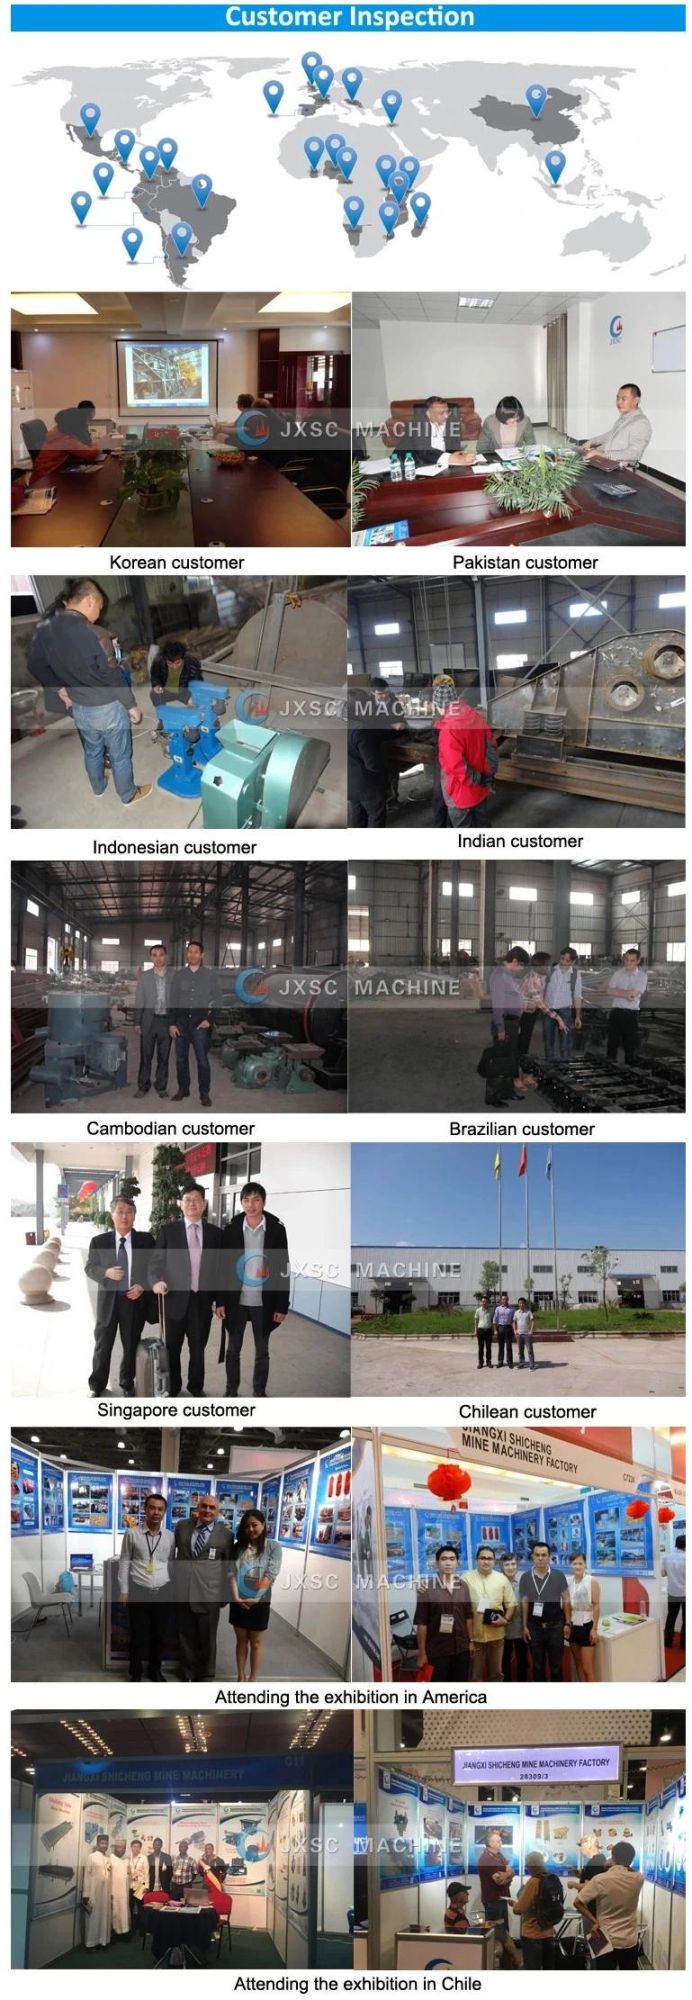 High Efficient Alluvial Type Gravity Gold Centrifugal Concentrator